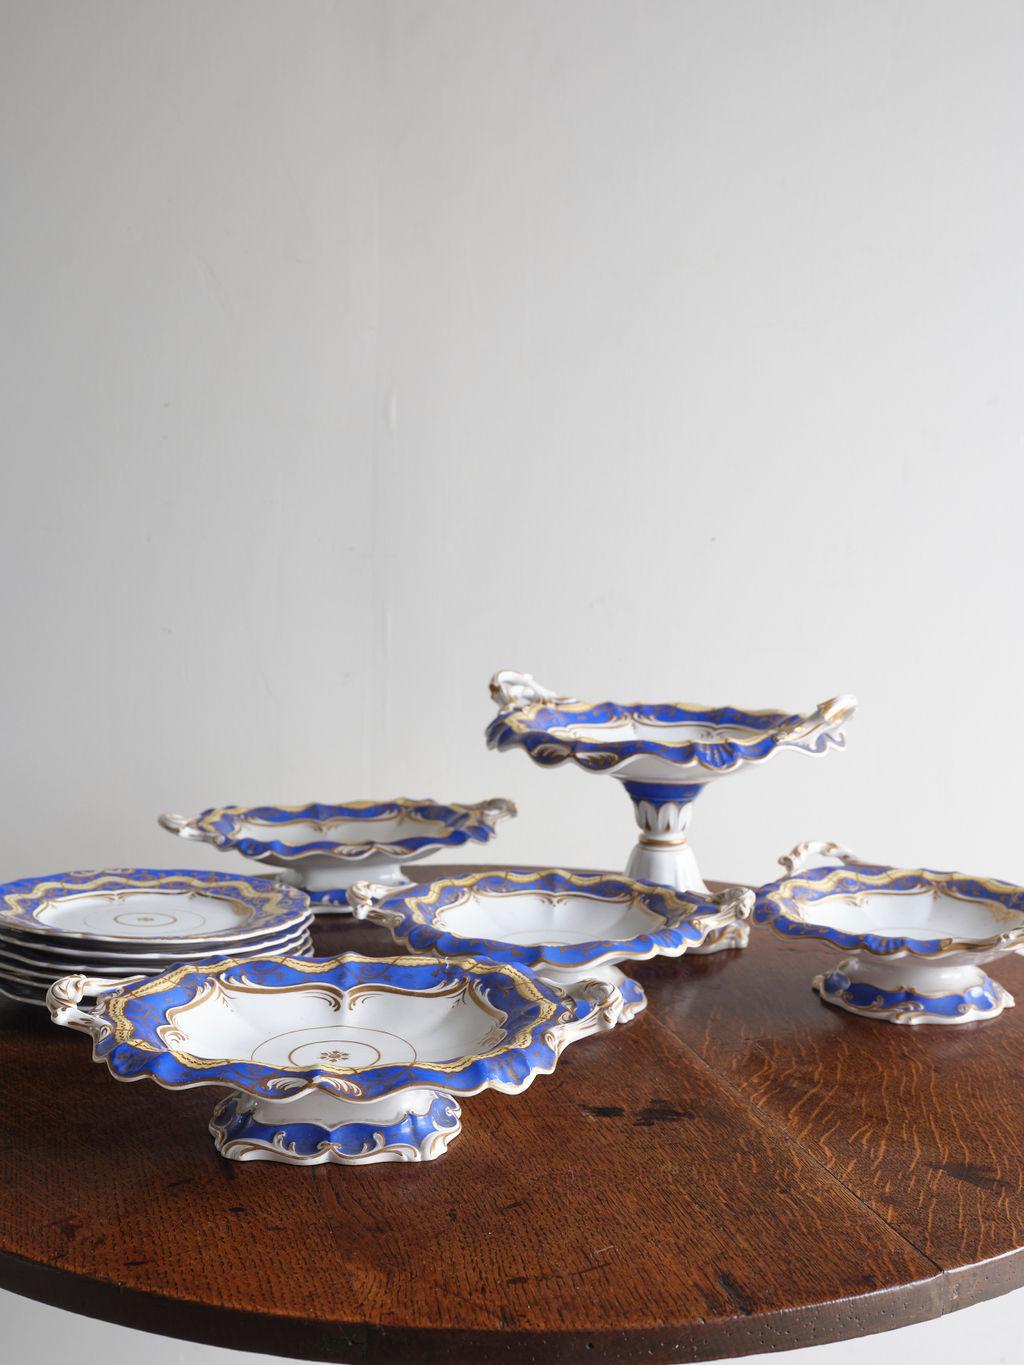 This late Victorian English Dessert service set, circa 1880, would make a lovely addition to your dining room for a dinner party. Beautifully potted and hand painted, this set features luxurious blue, white, and gold coloration. This dessert set